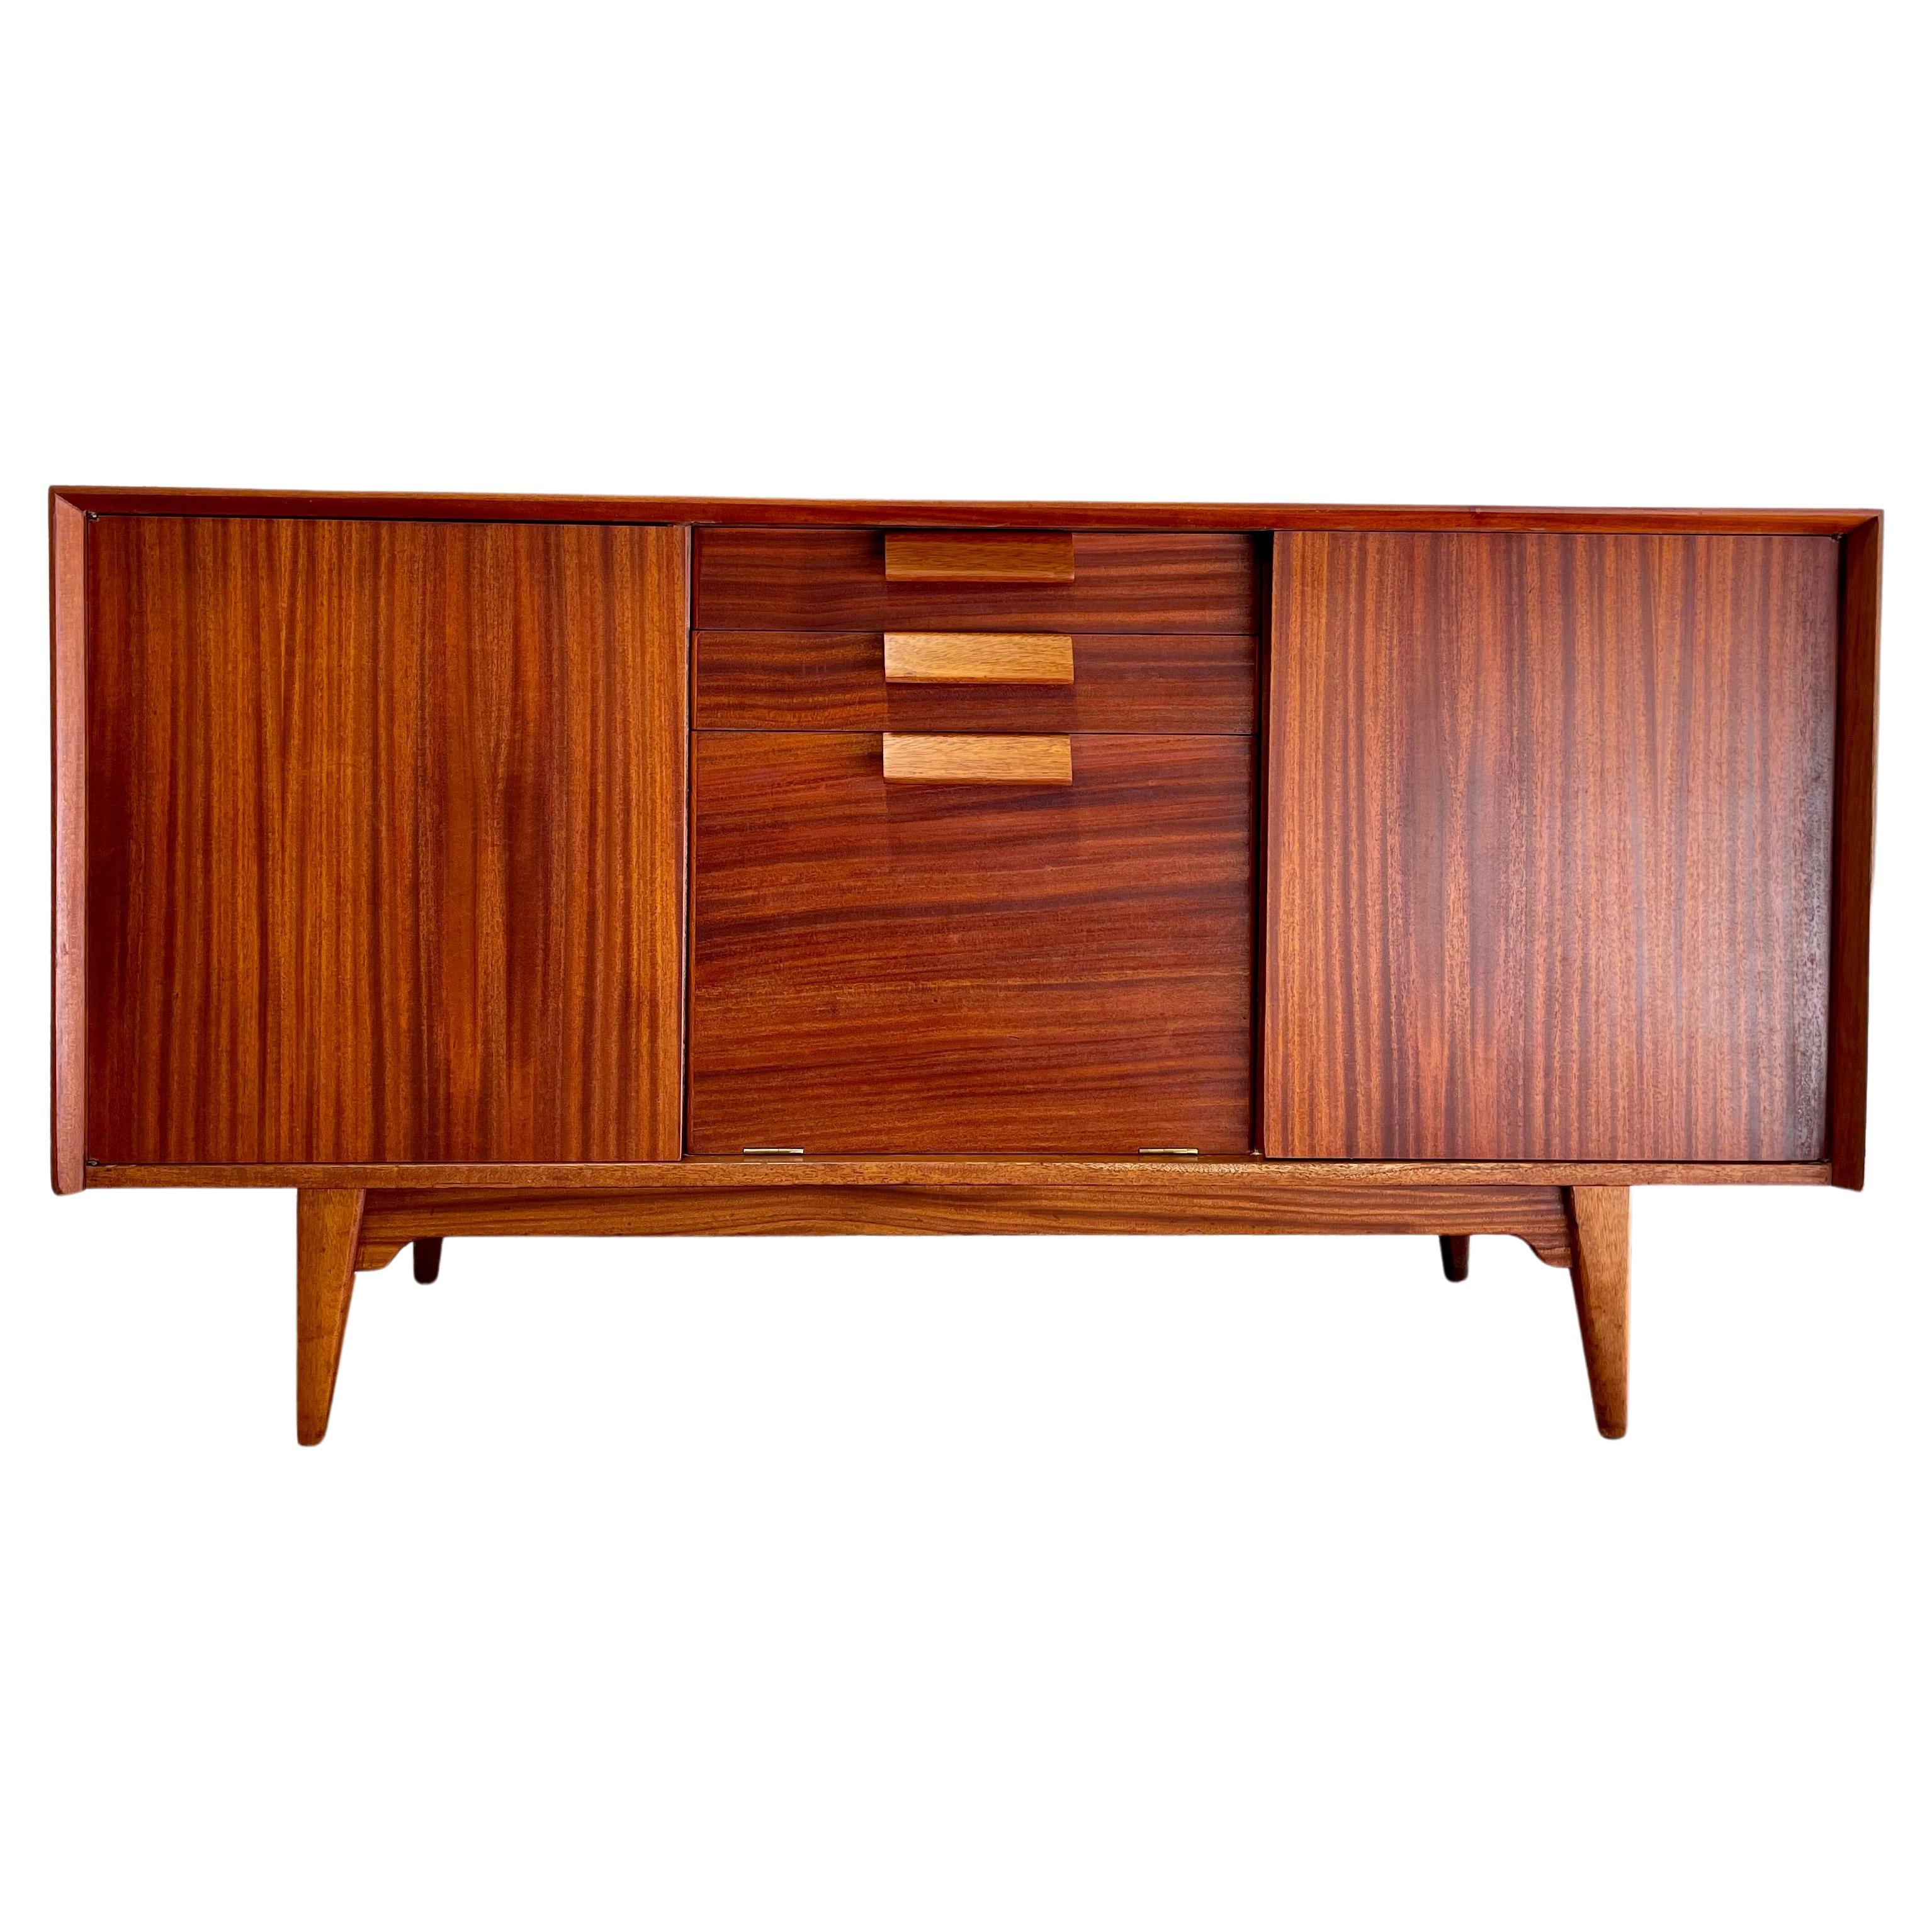 Gorgeous Jens Risom Mid Century Modern Credenza / Media Stand, c. 1960's. This rare sideboard by Jens Risom offers a wealth of storage space among two shelving areas with adjustable or removable shelving (two shelves pictured but three are included)